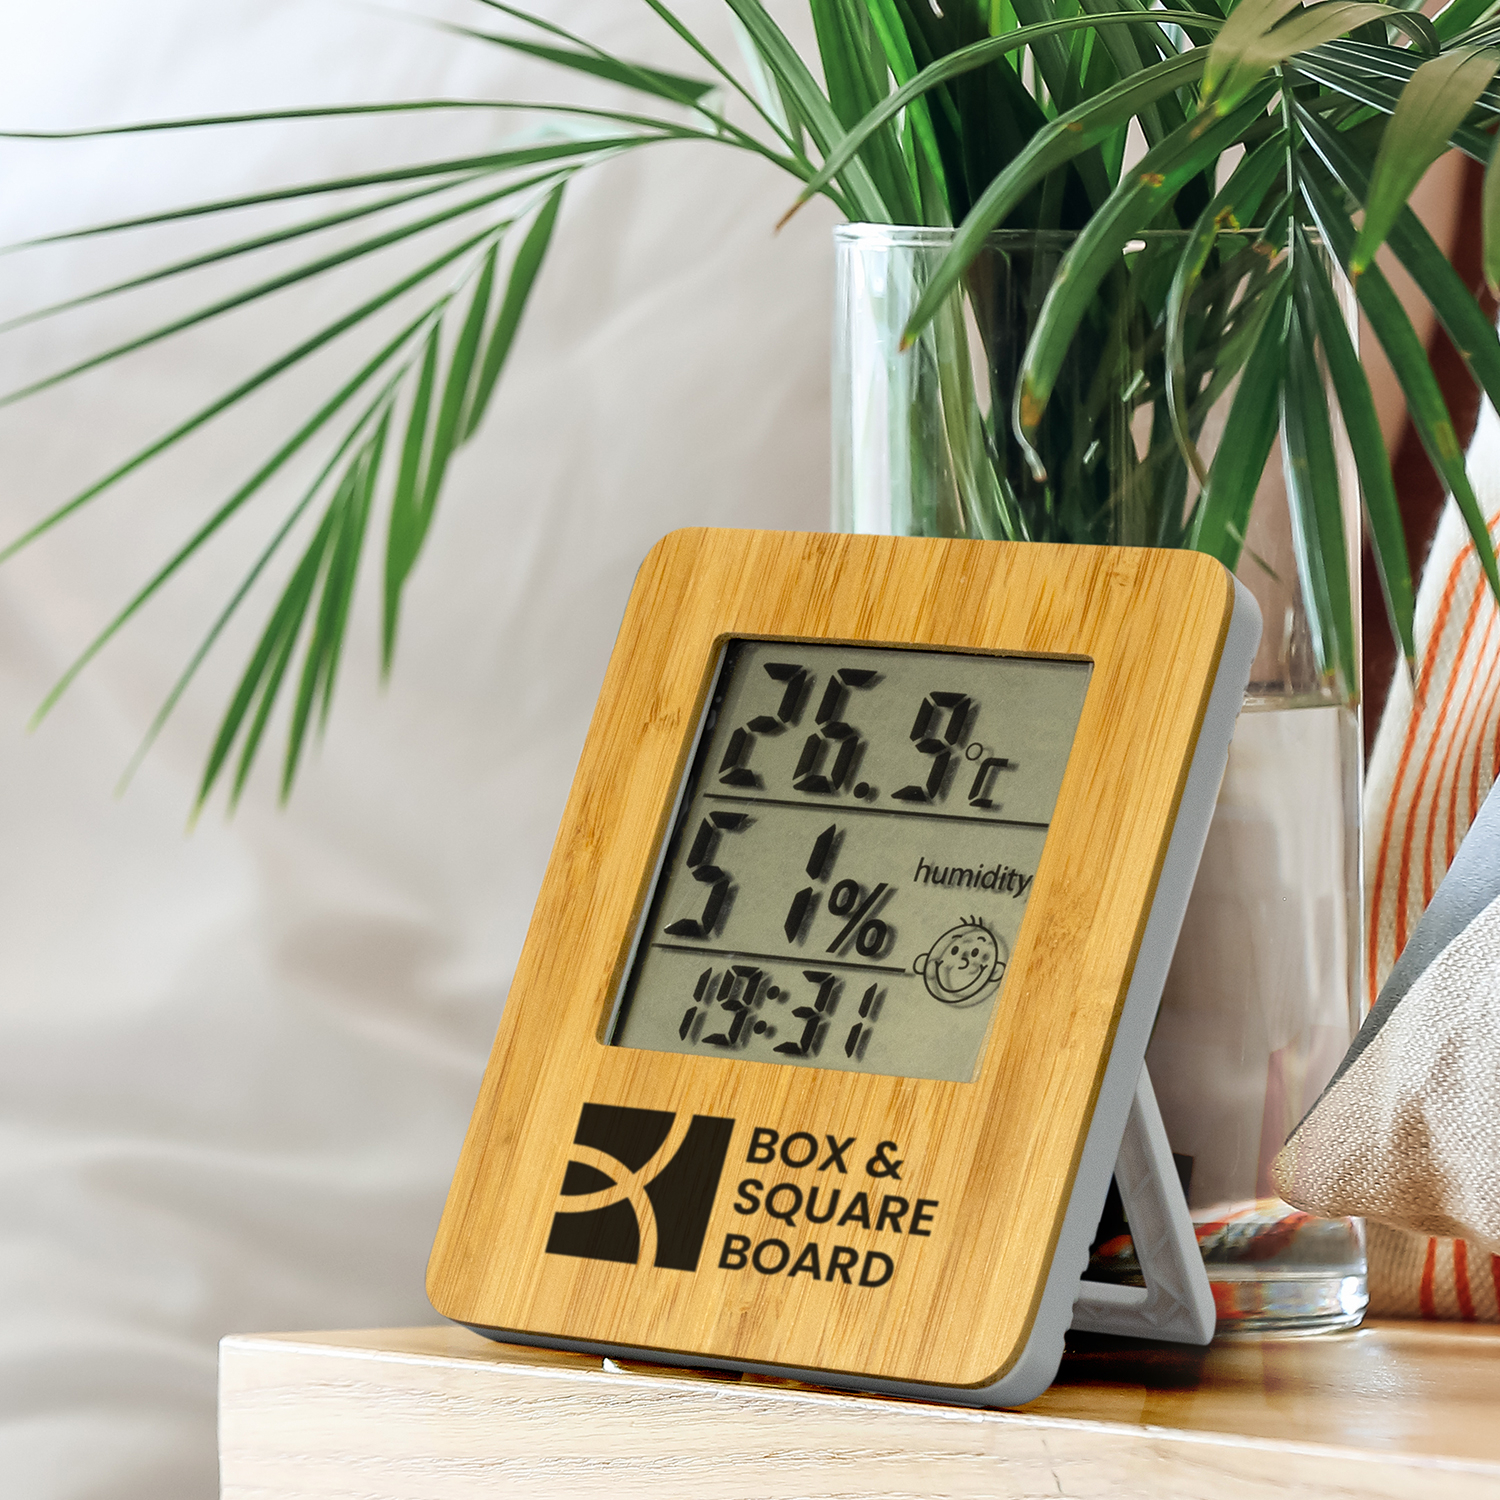 Bamboo Weather Station Features